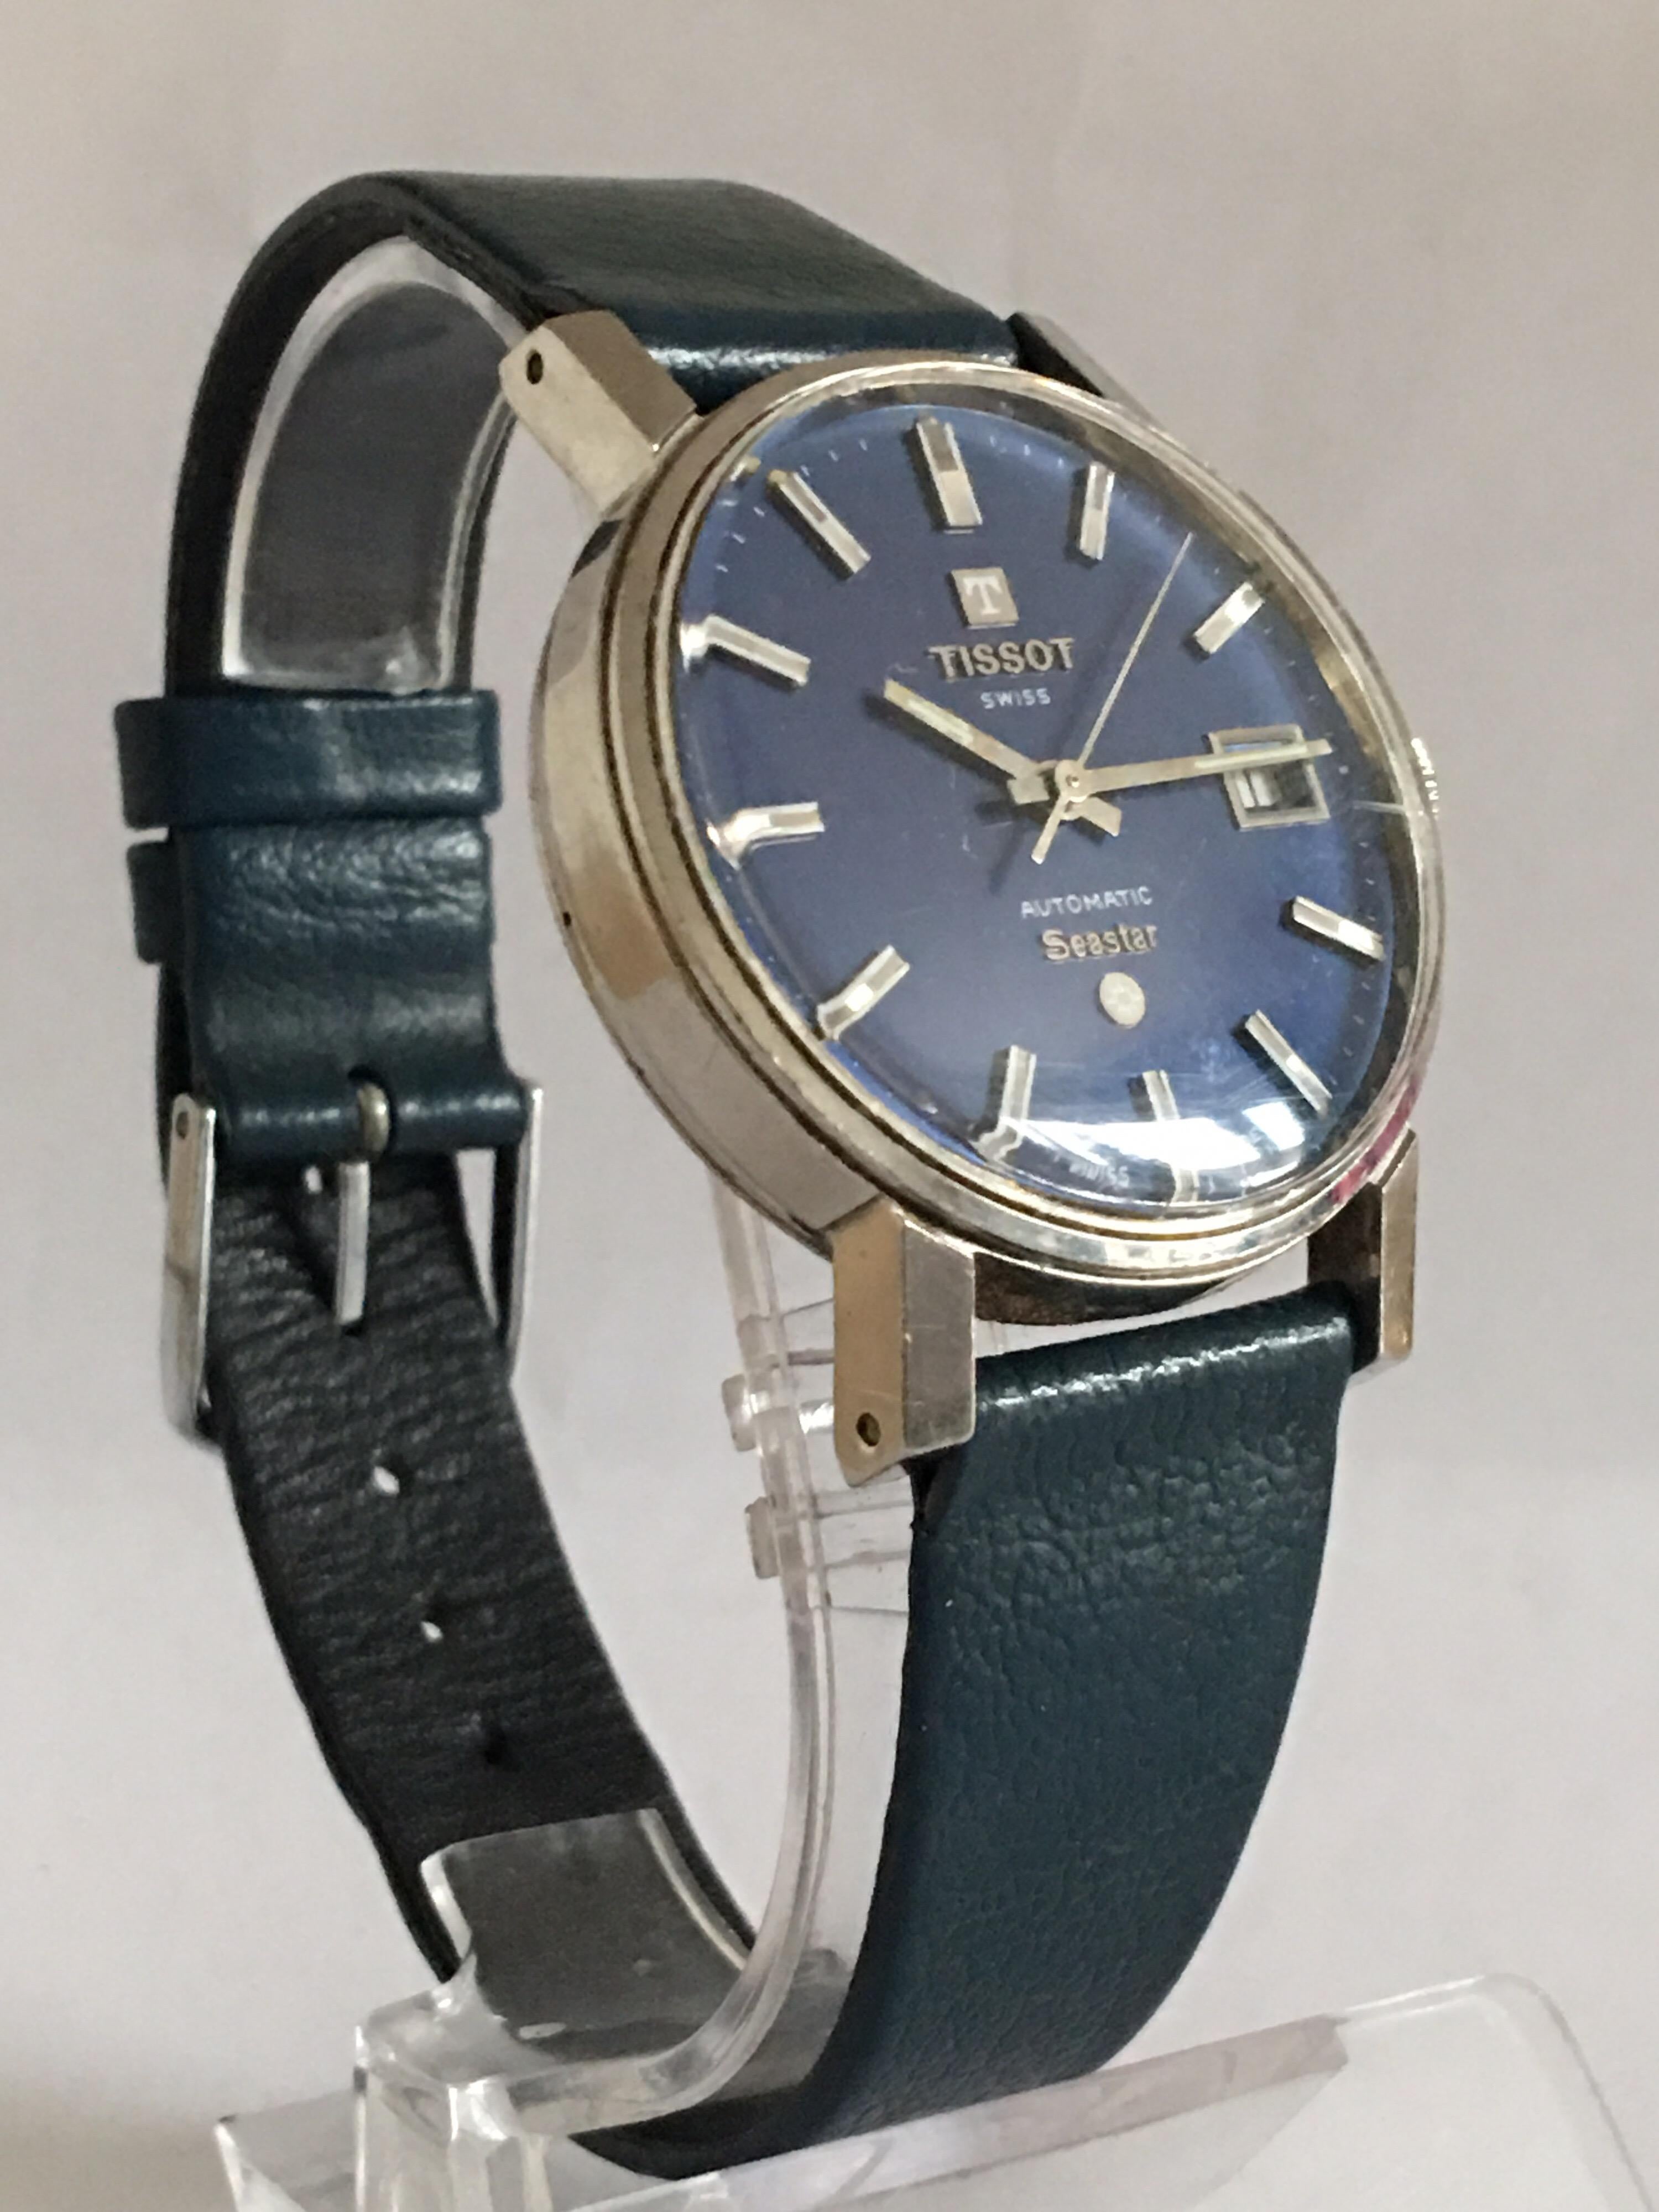 This classic & Elegant Pre-owned Mechanical watch is in good Working condition and is running well. There a fine scratches on the glass . 

Please study the images carefully as form part of the description.